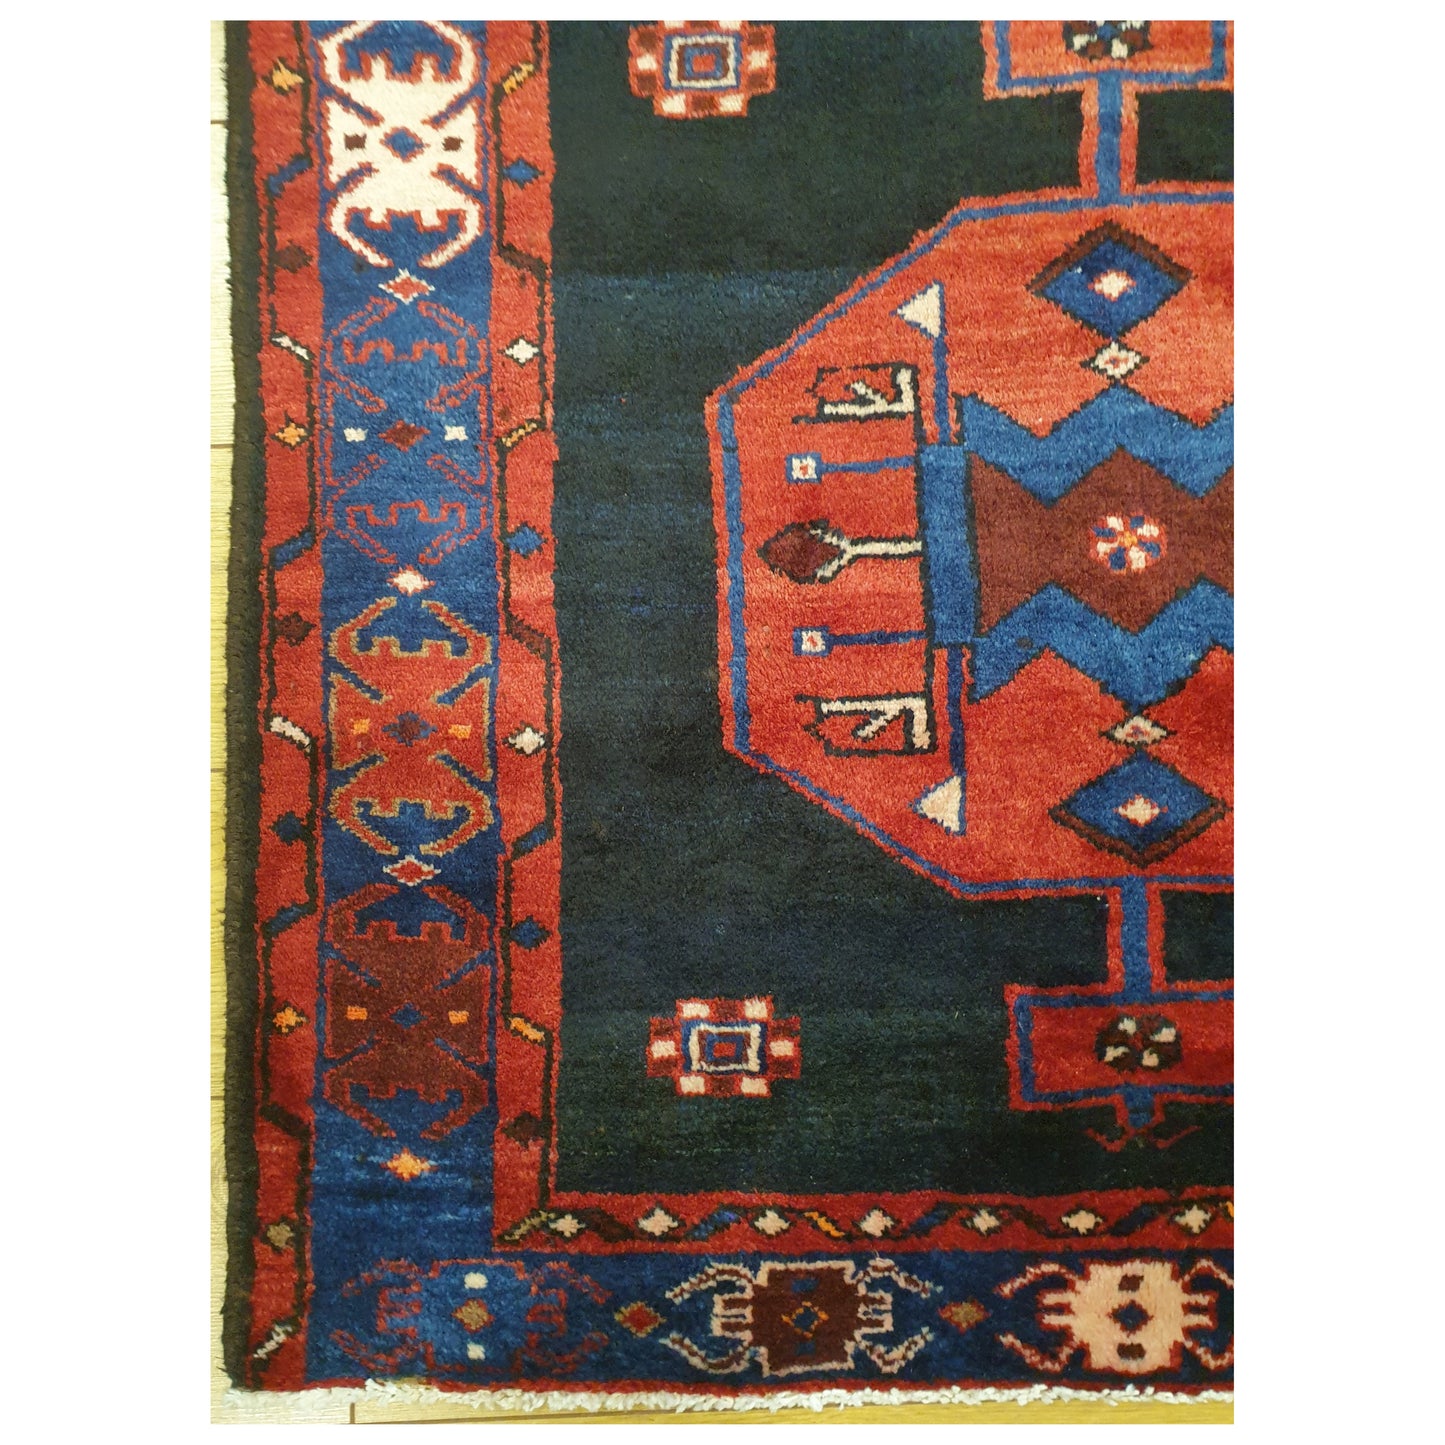 Deep Red and Navy Persian Runner, 300 x 105cm